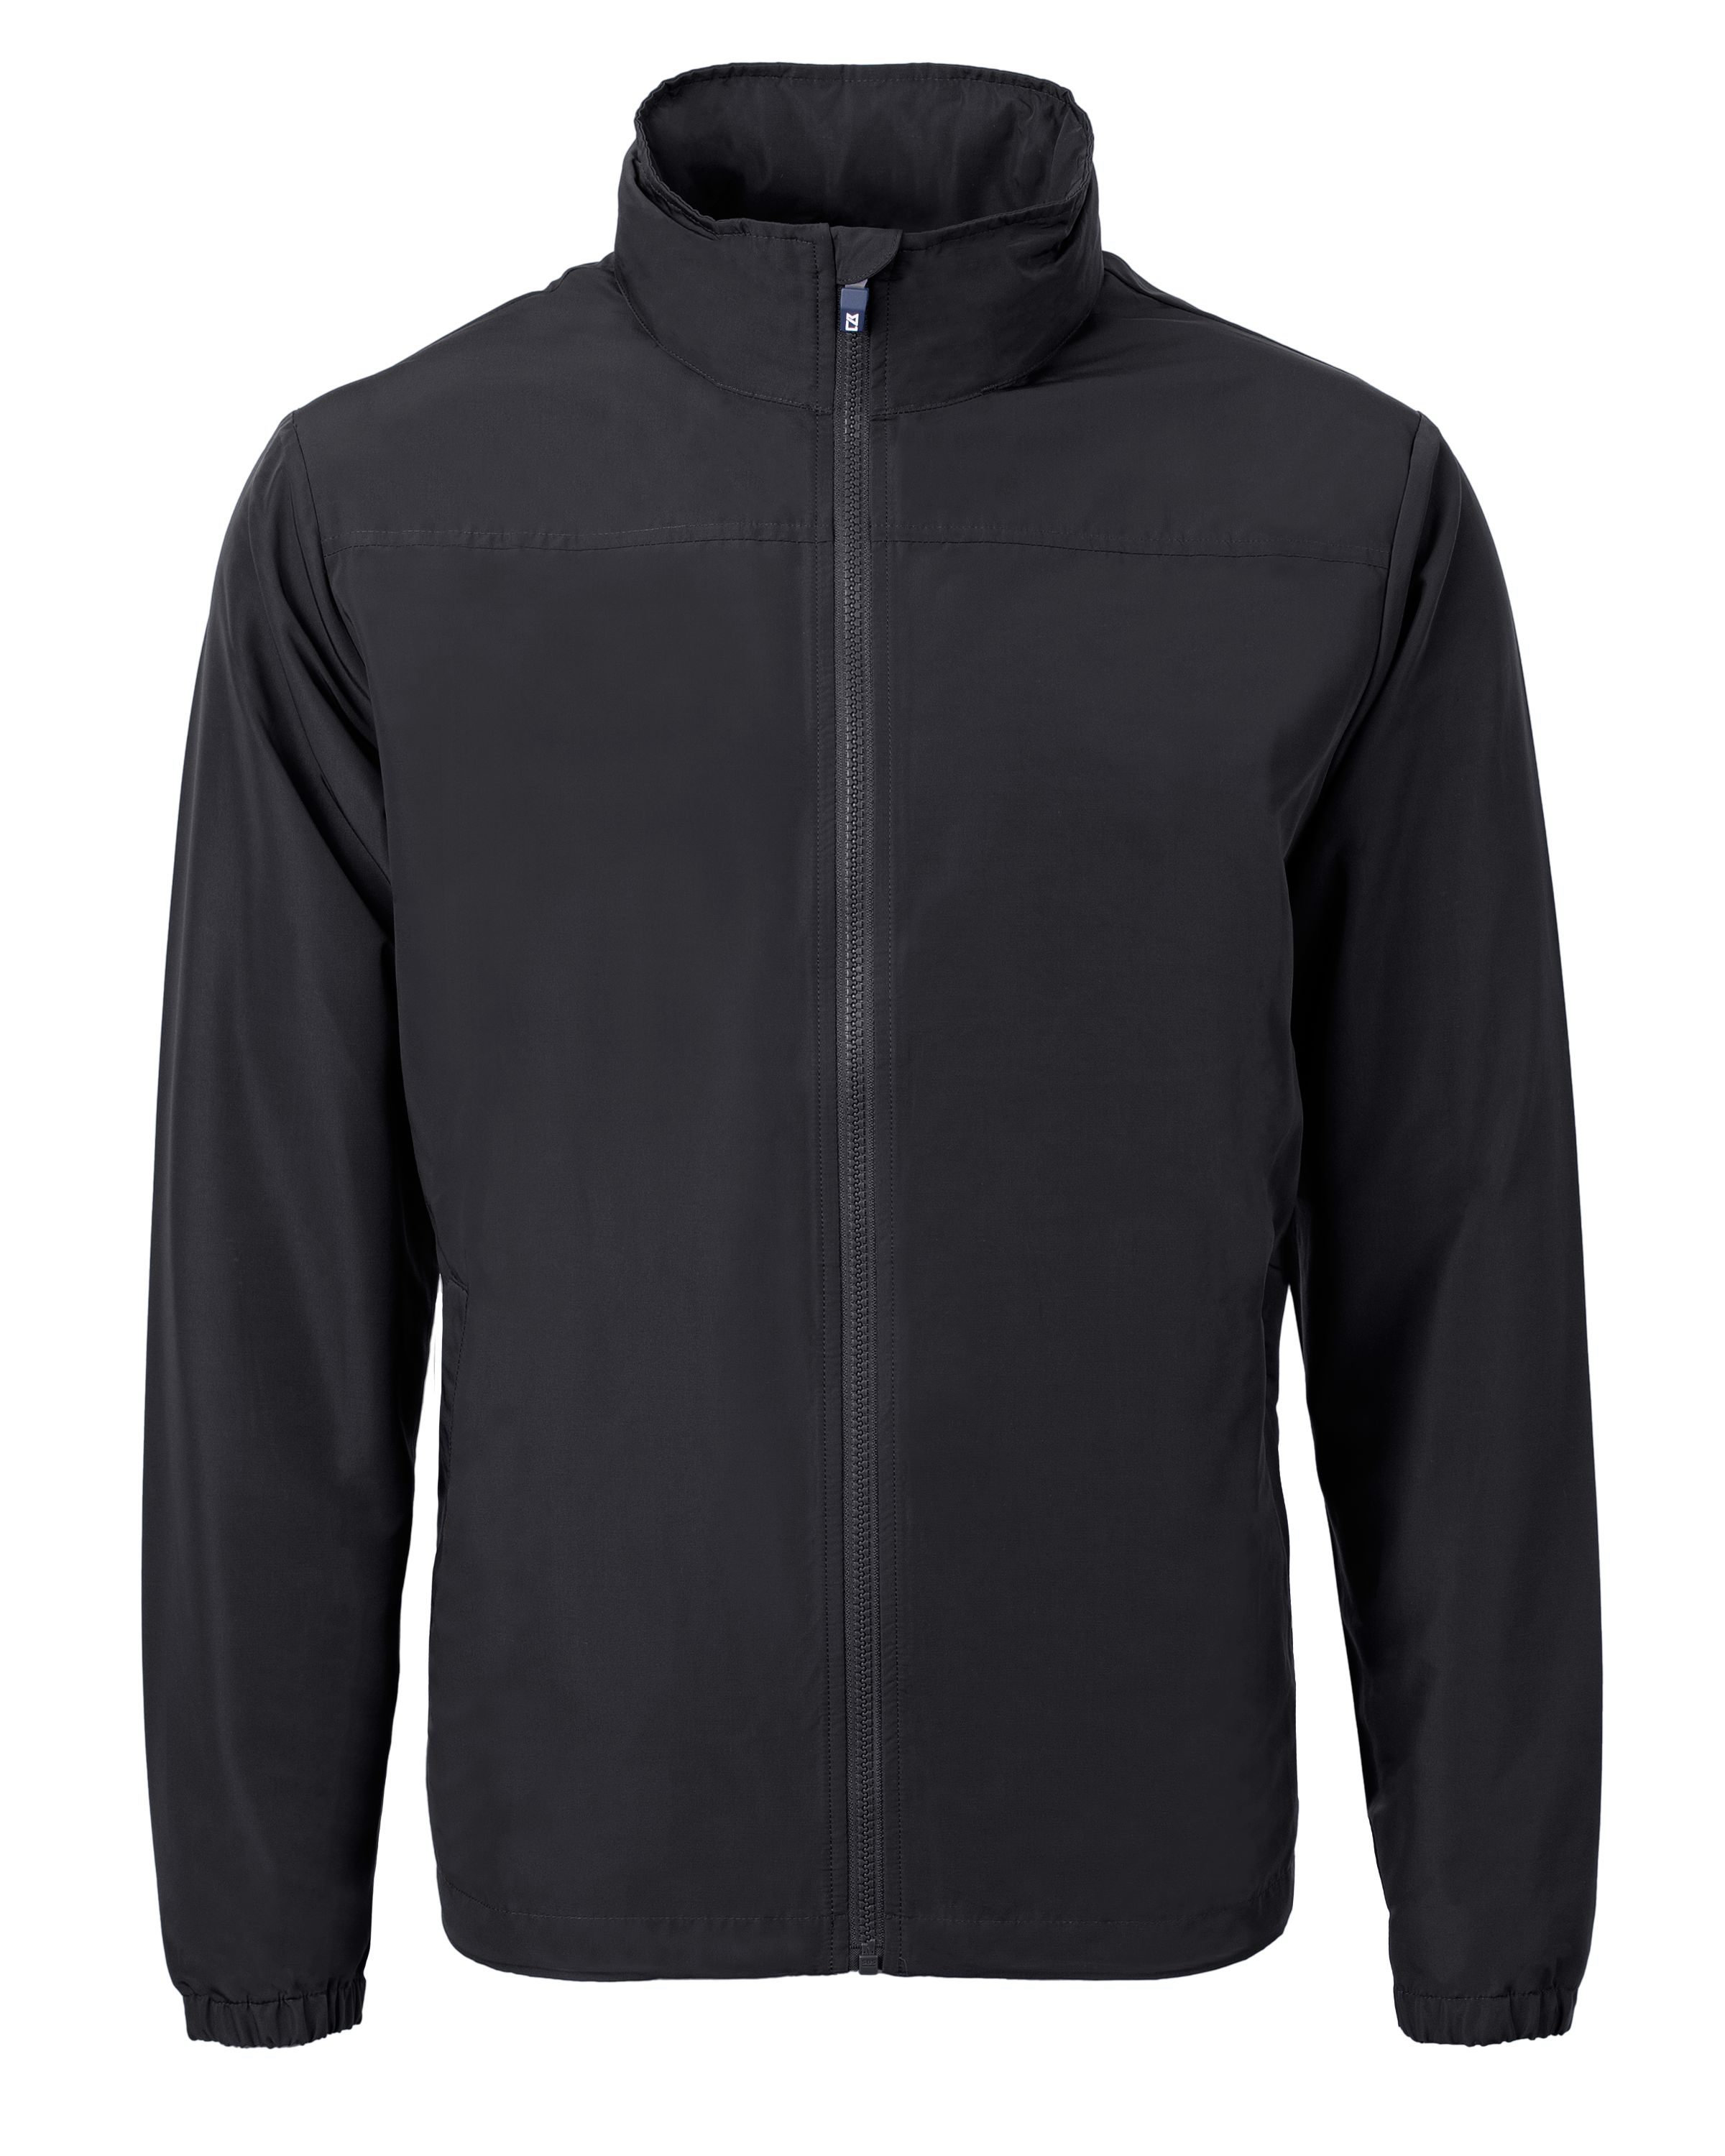 CUTTER & BUCK MCO00073 - Men's Charter Eco Recycled Full-Zip Jacket